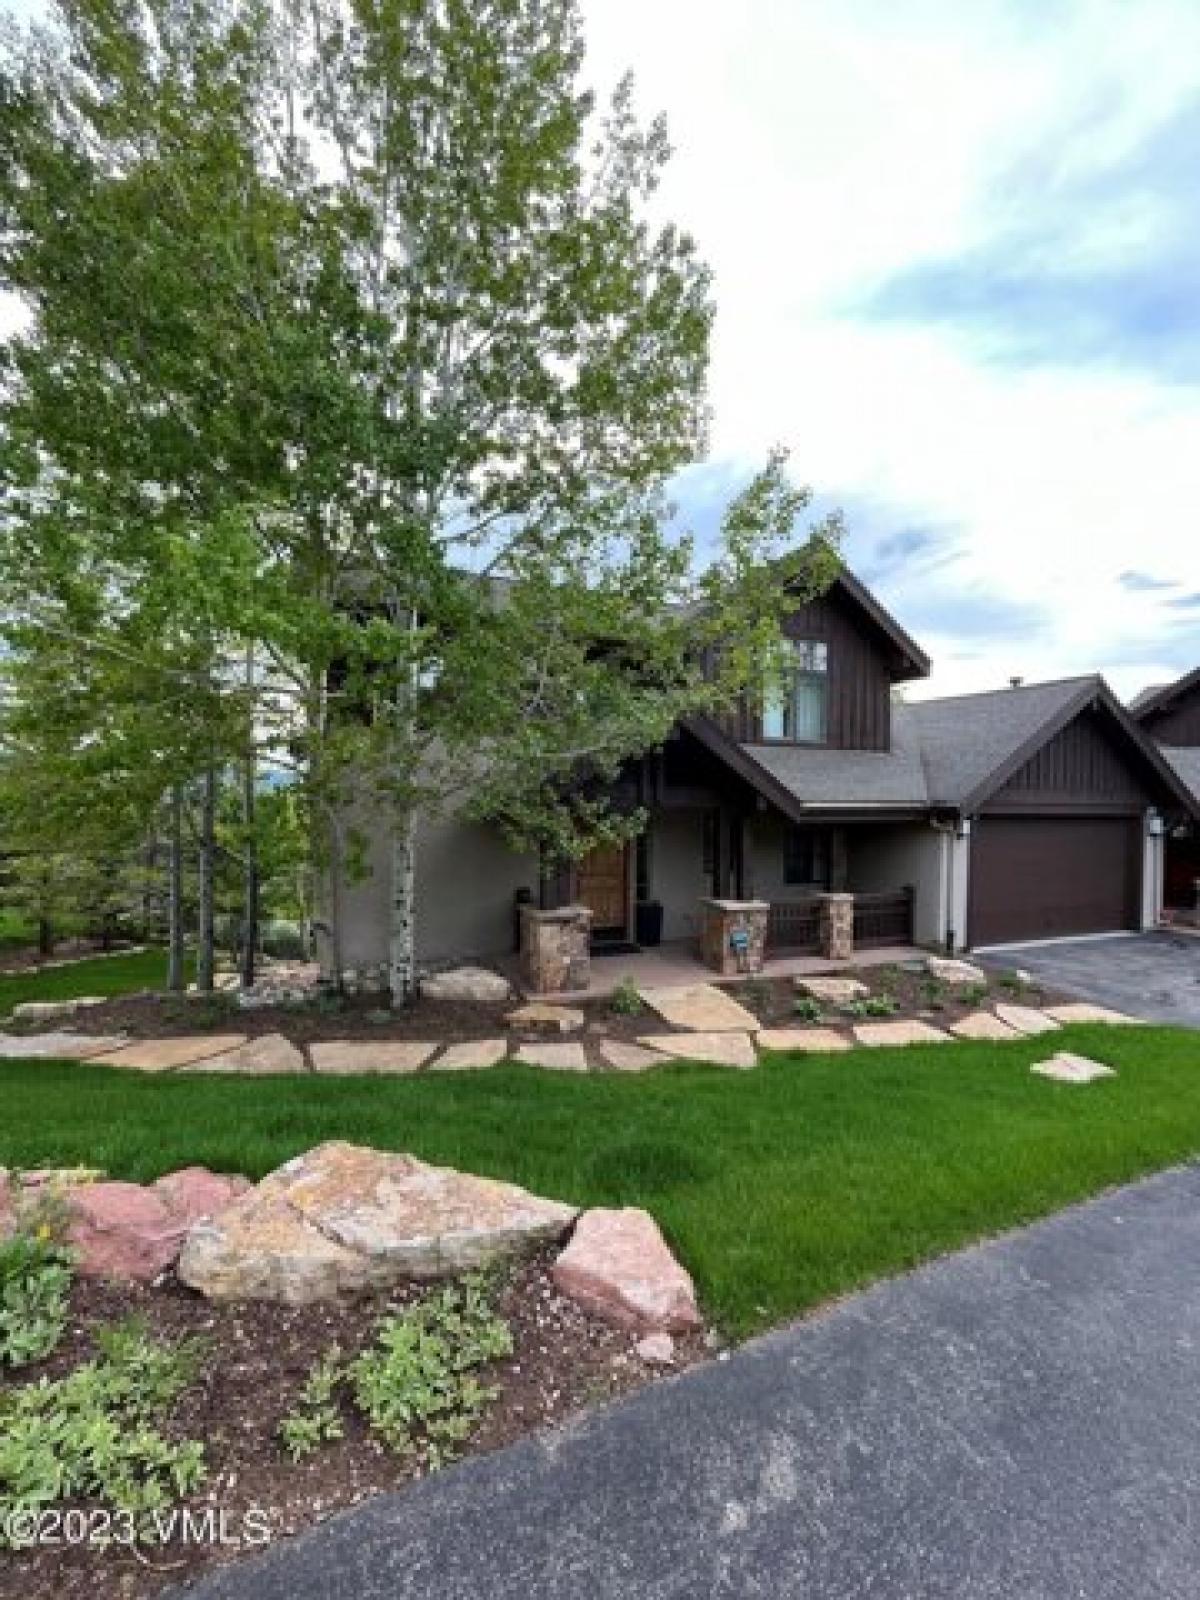 Picture of Home For Sale in Avon, Colorado, United States